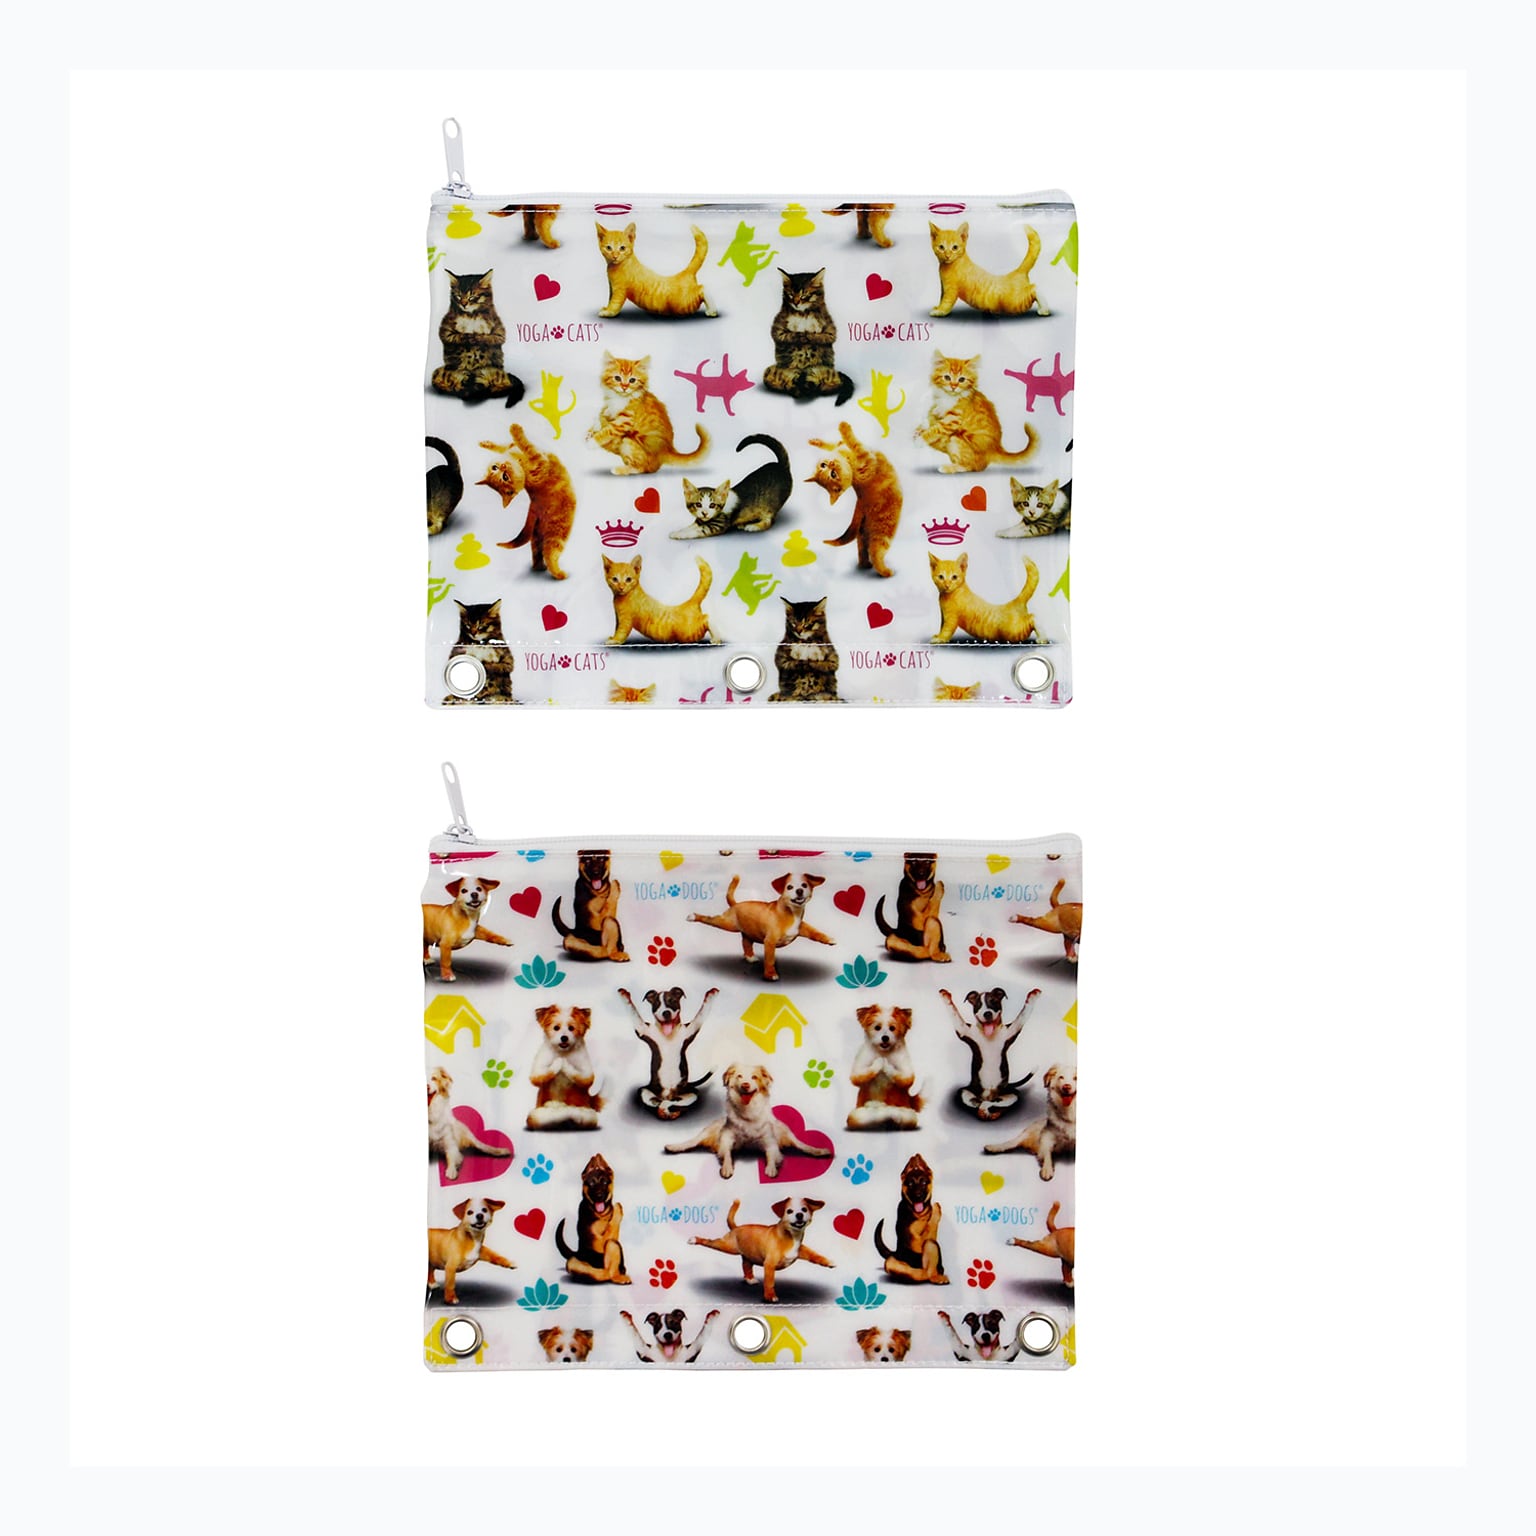 Yoga Cats & Dogs Binder Pencil pouch, 9.5 x 7.5, 6pc Value Pack